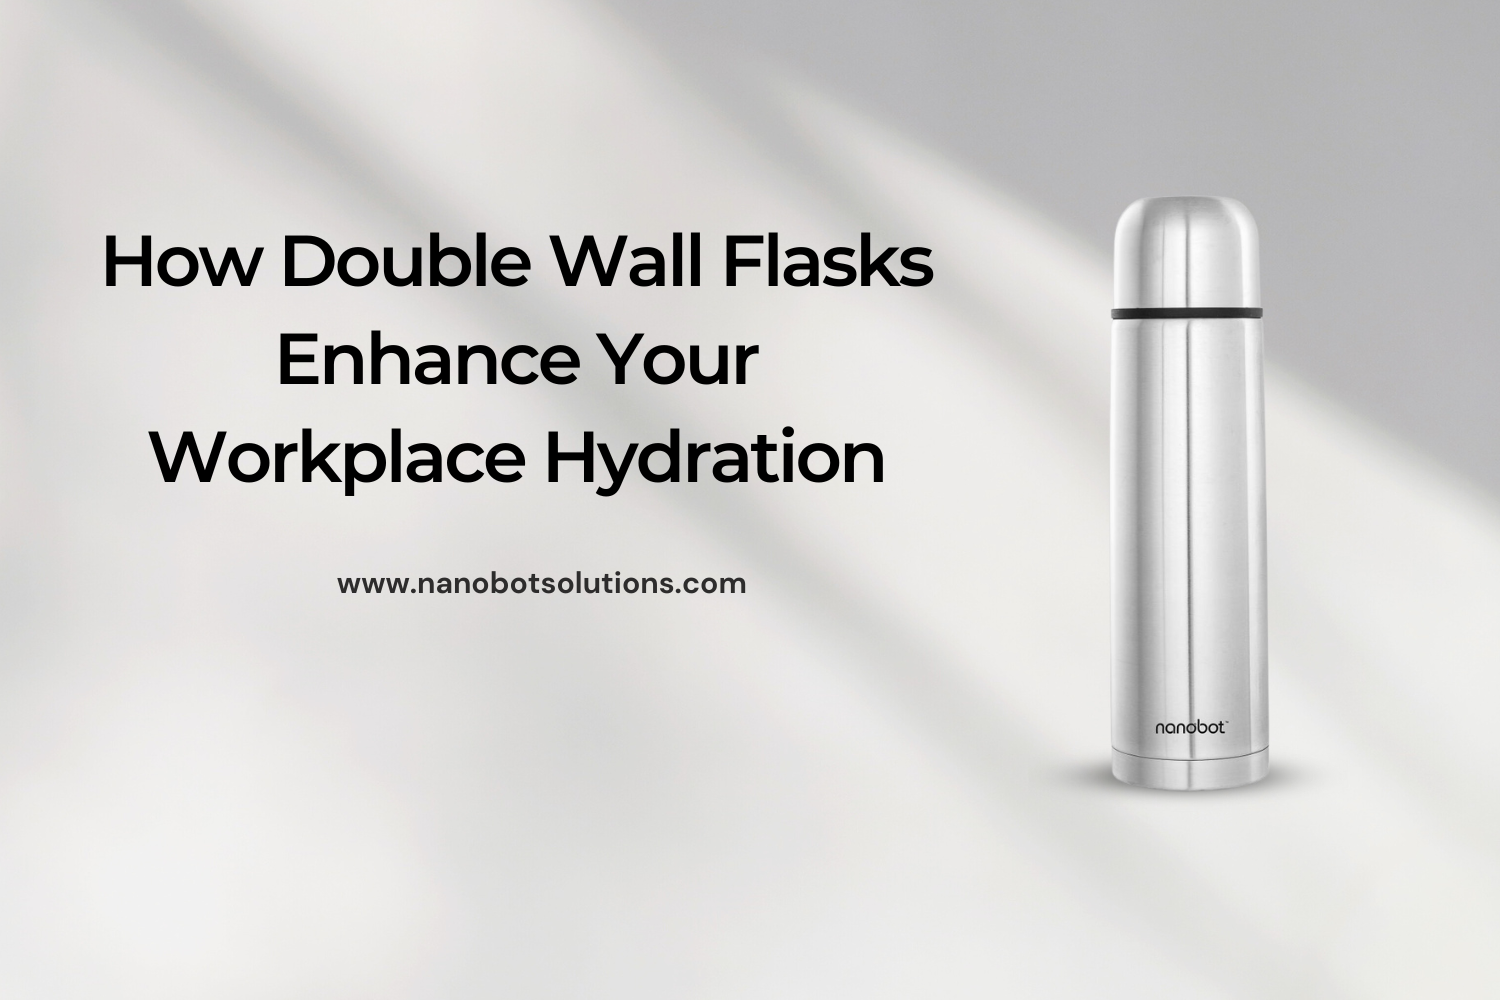 How Double Wall Flasks Enhance Your Workplace Hydration | Nanobot